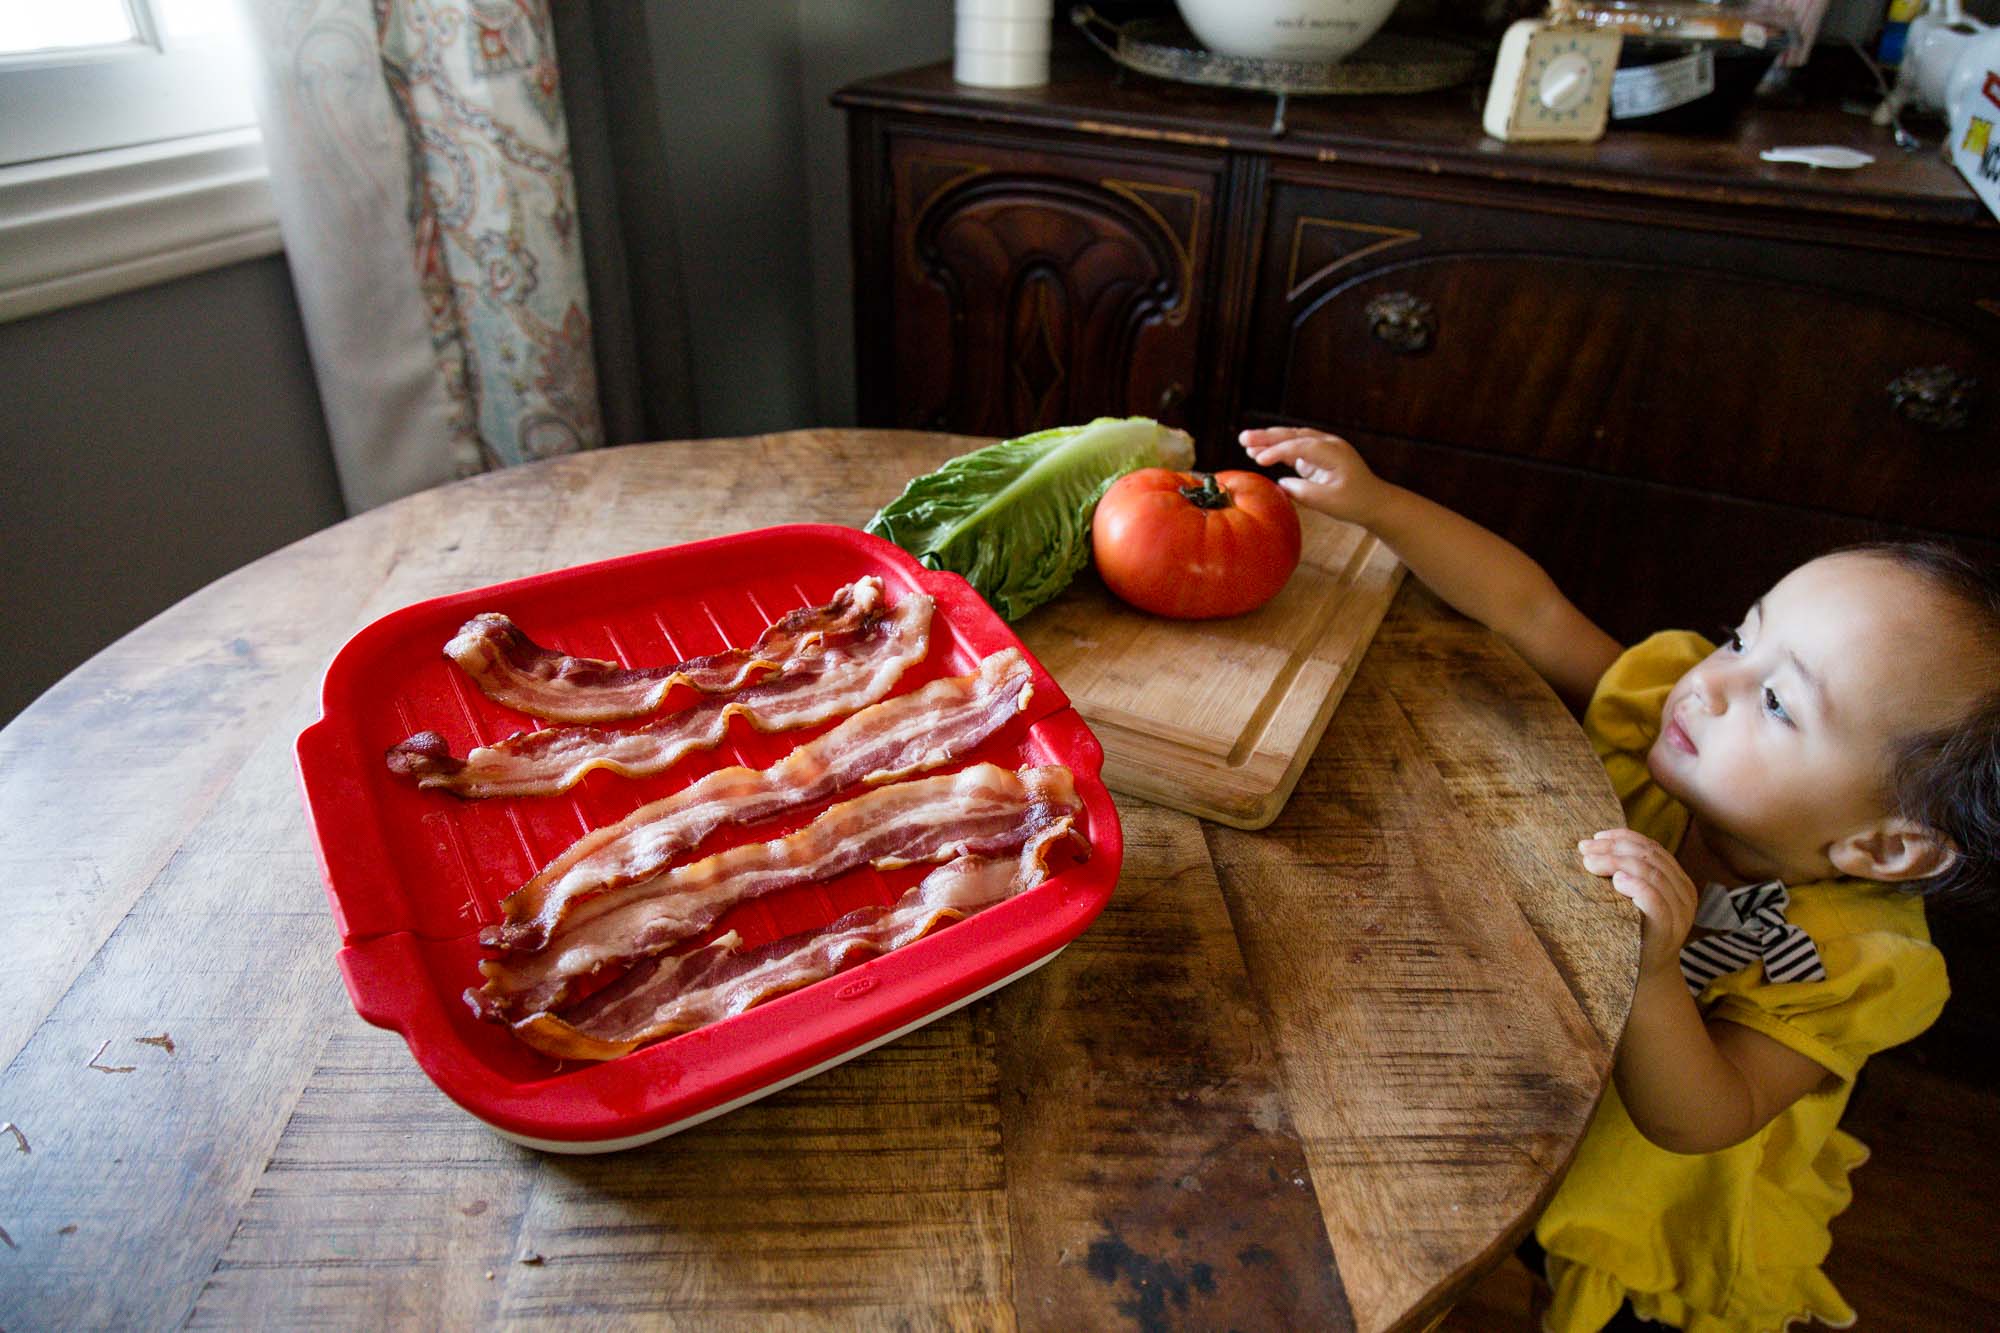 The 10 Best Bacon Cookers For Perfect, Crispy Strips Of Bacon - Food Shark  Marfa